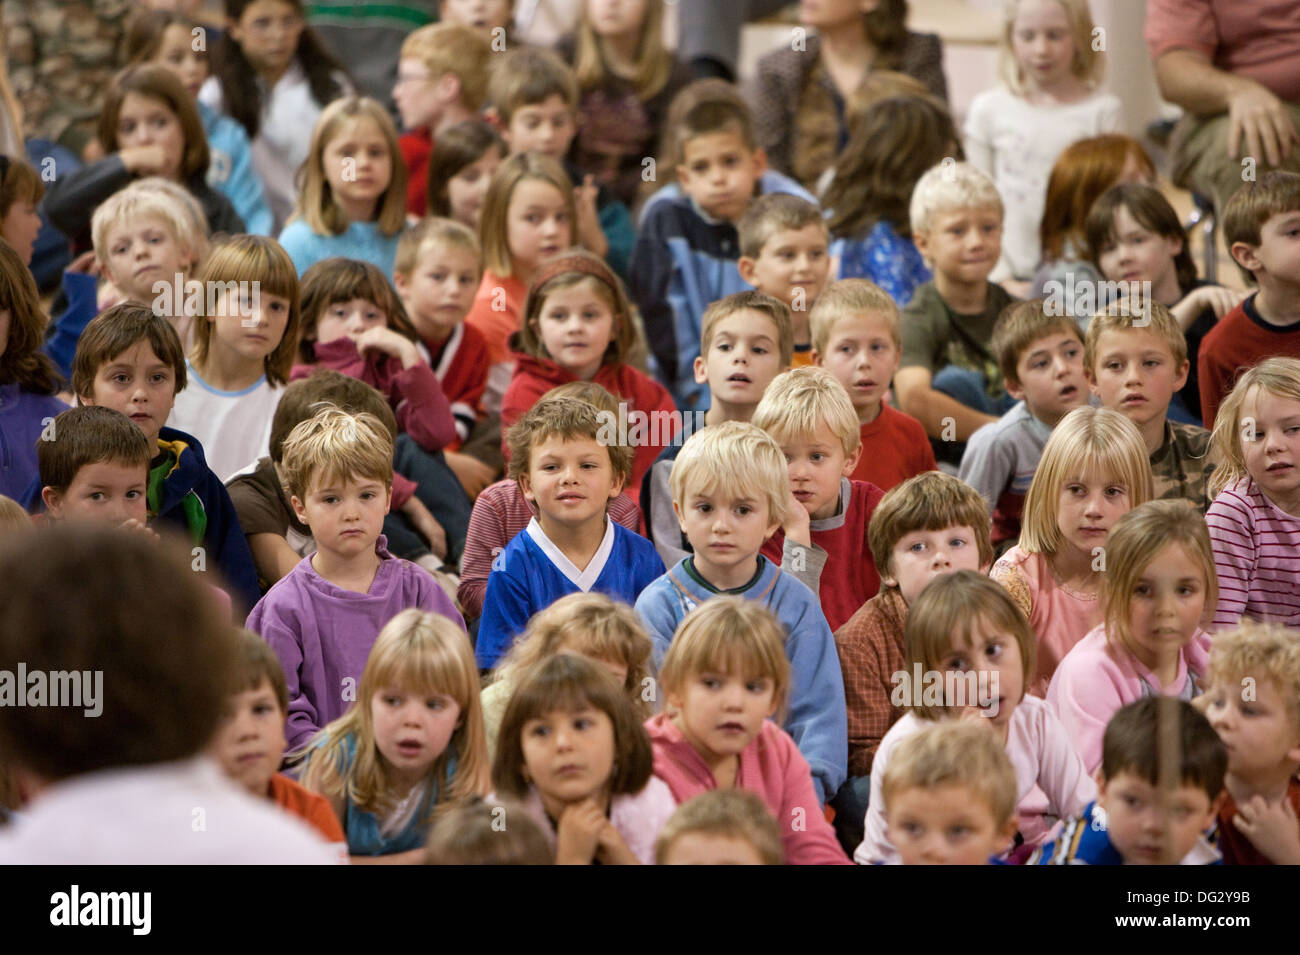 large group of children Stock Photo